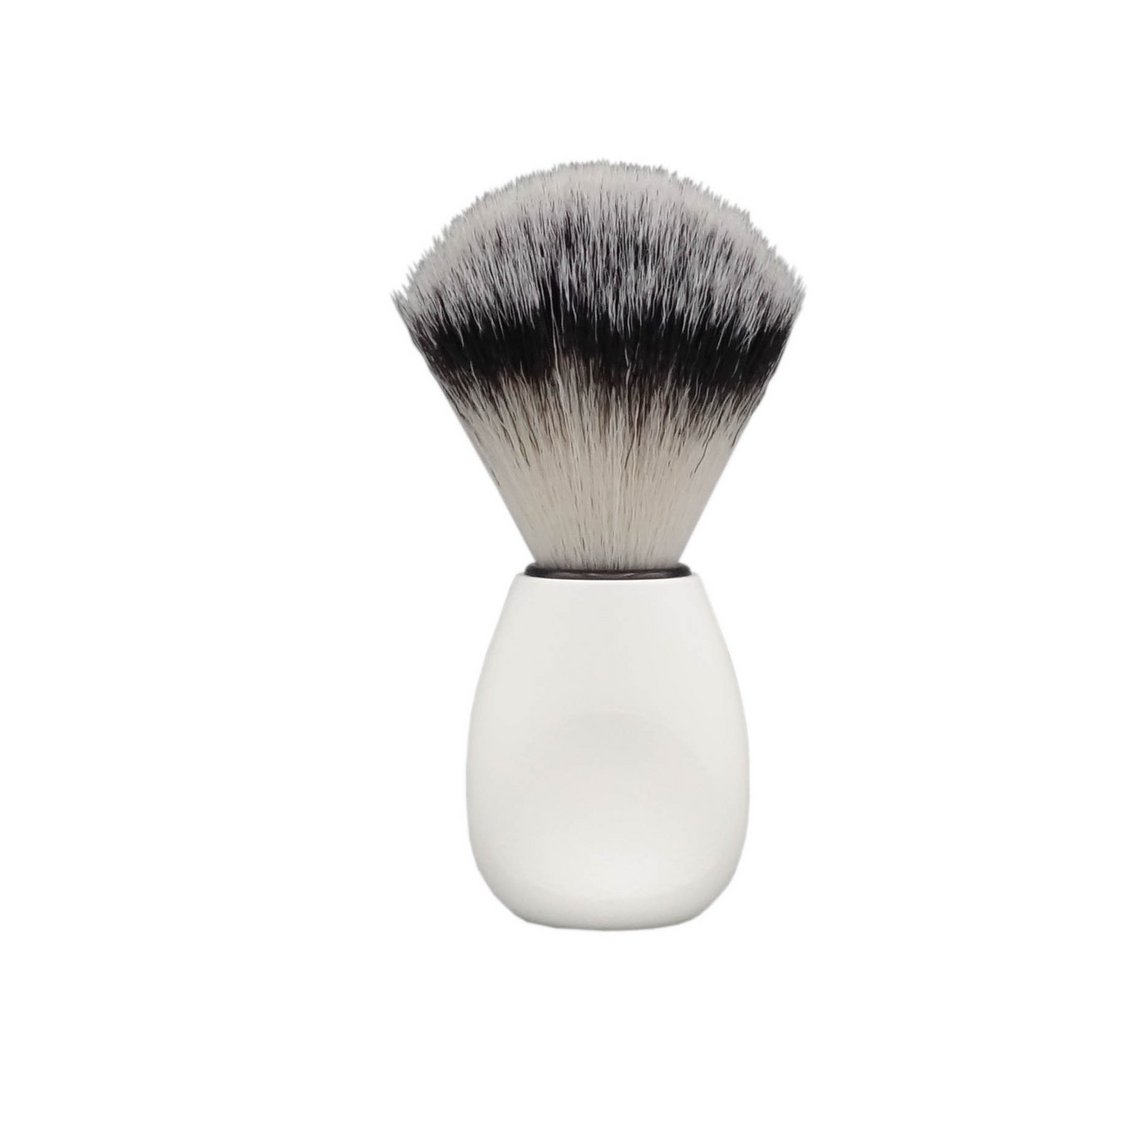 Shaving brush sythetic 3-band white handle with grip zone